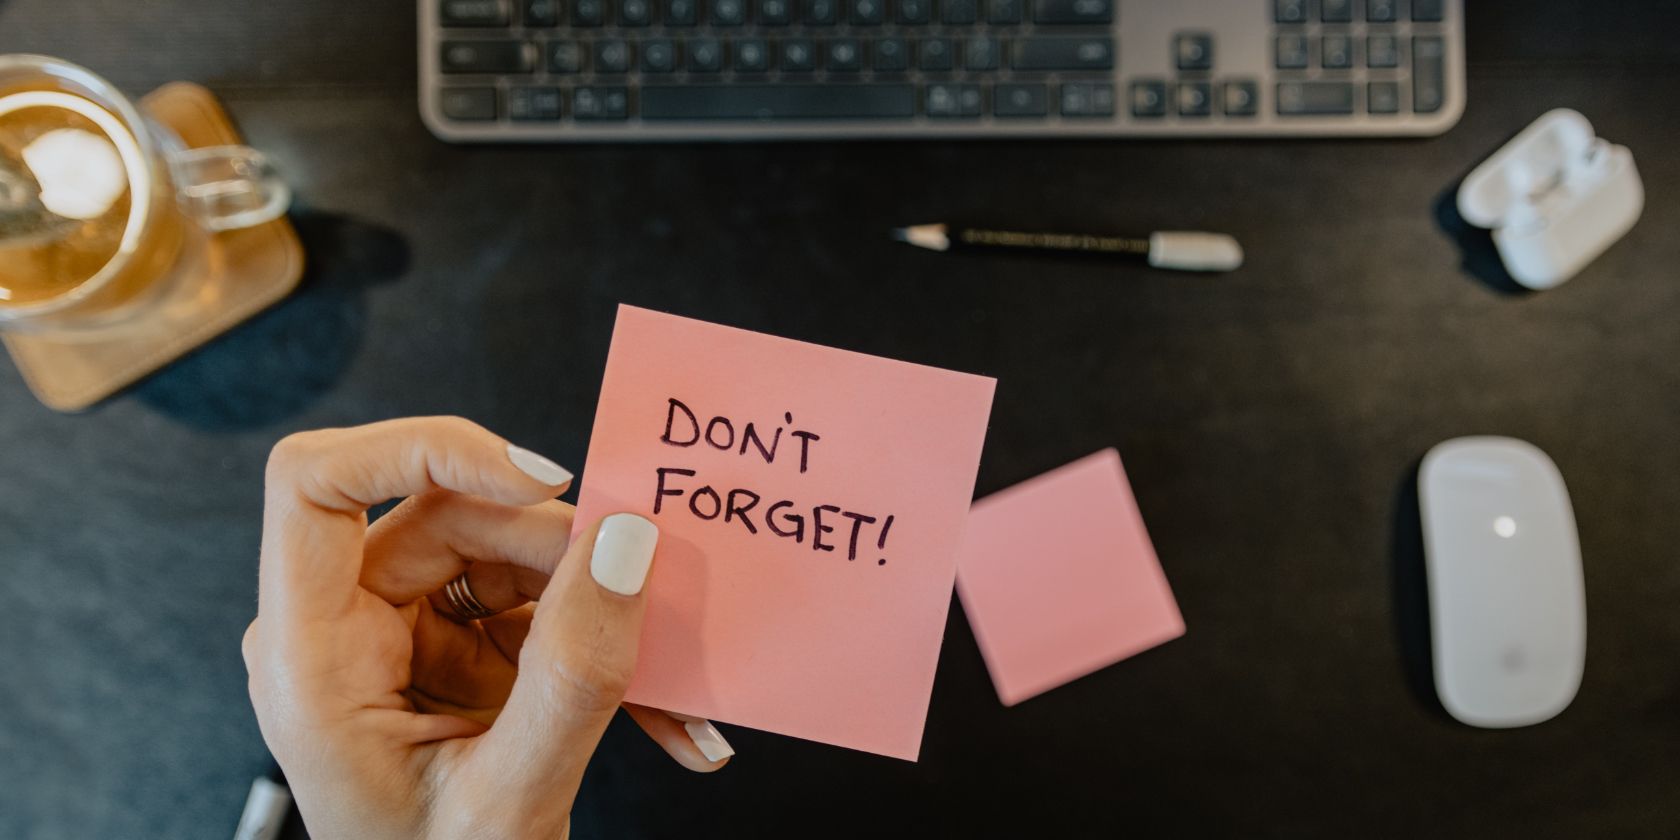 A hand with a sticky note that says don't forget above a computer keyboard